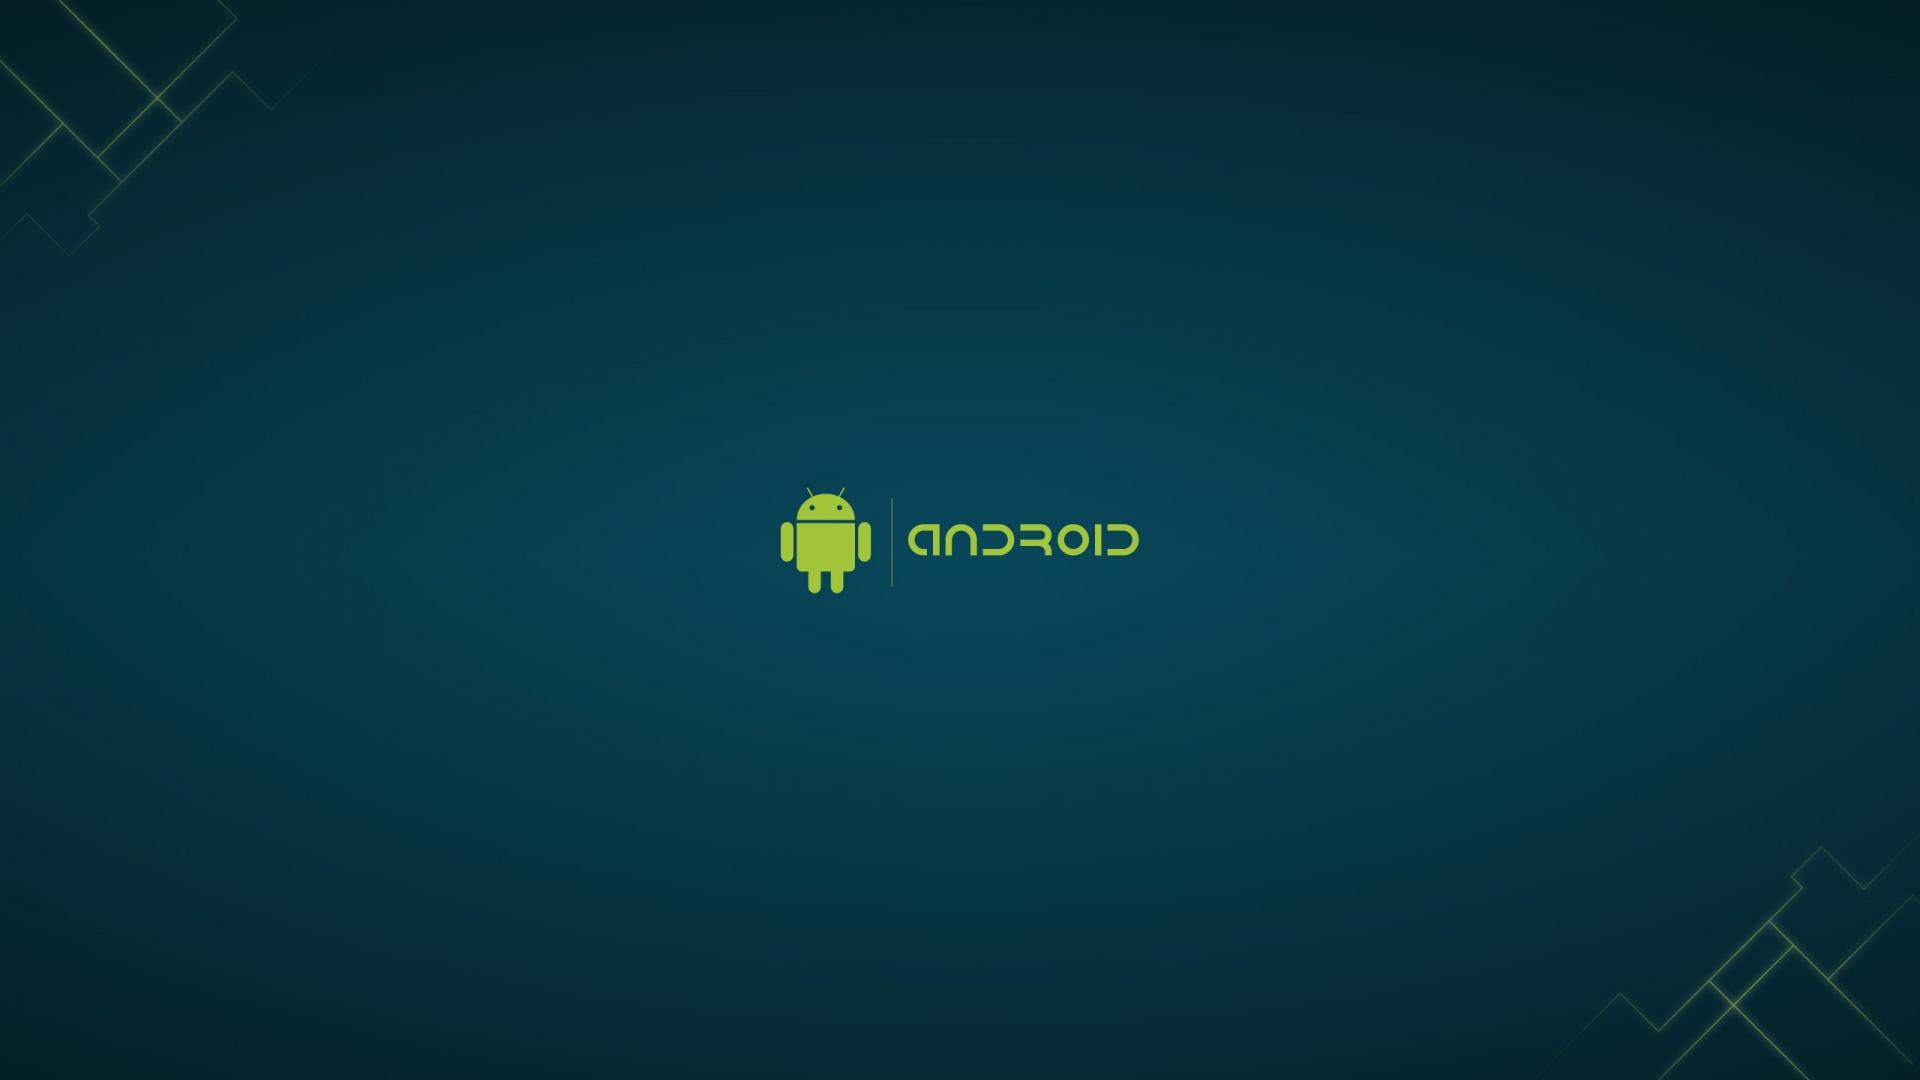 cool android wallpapers hd #5